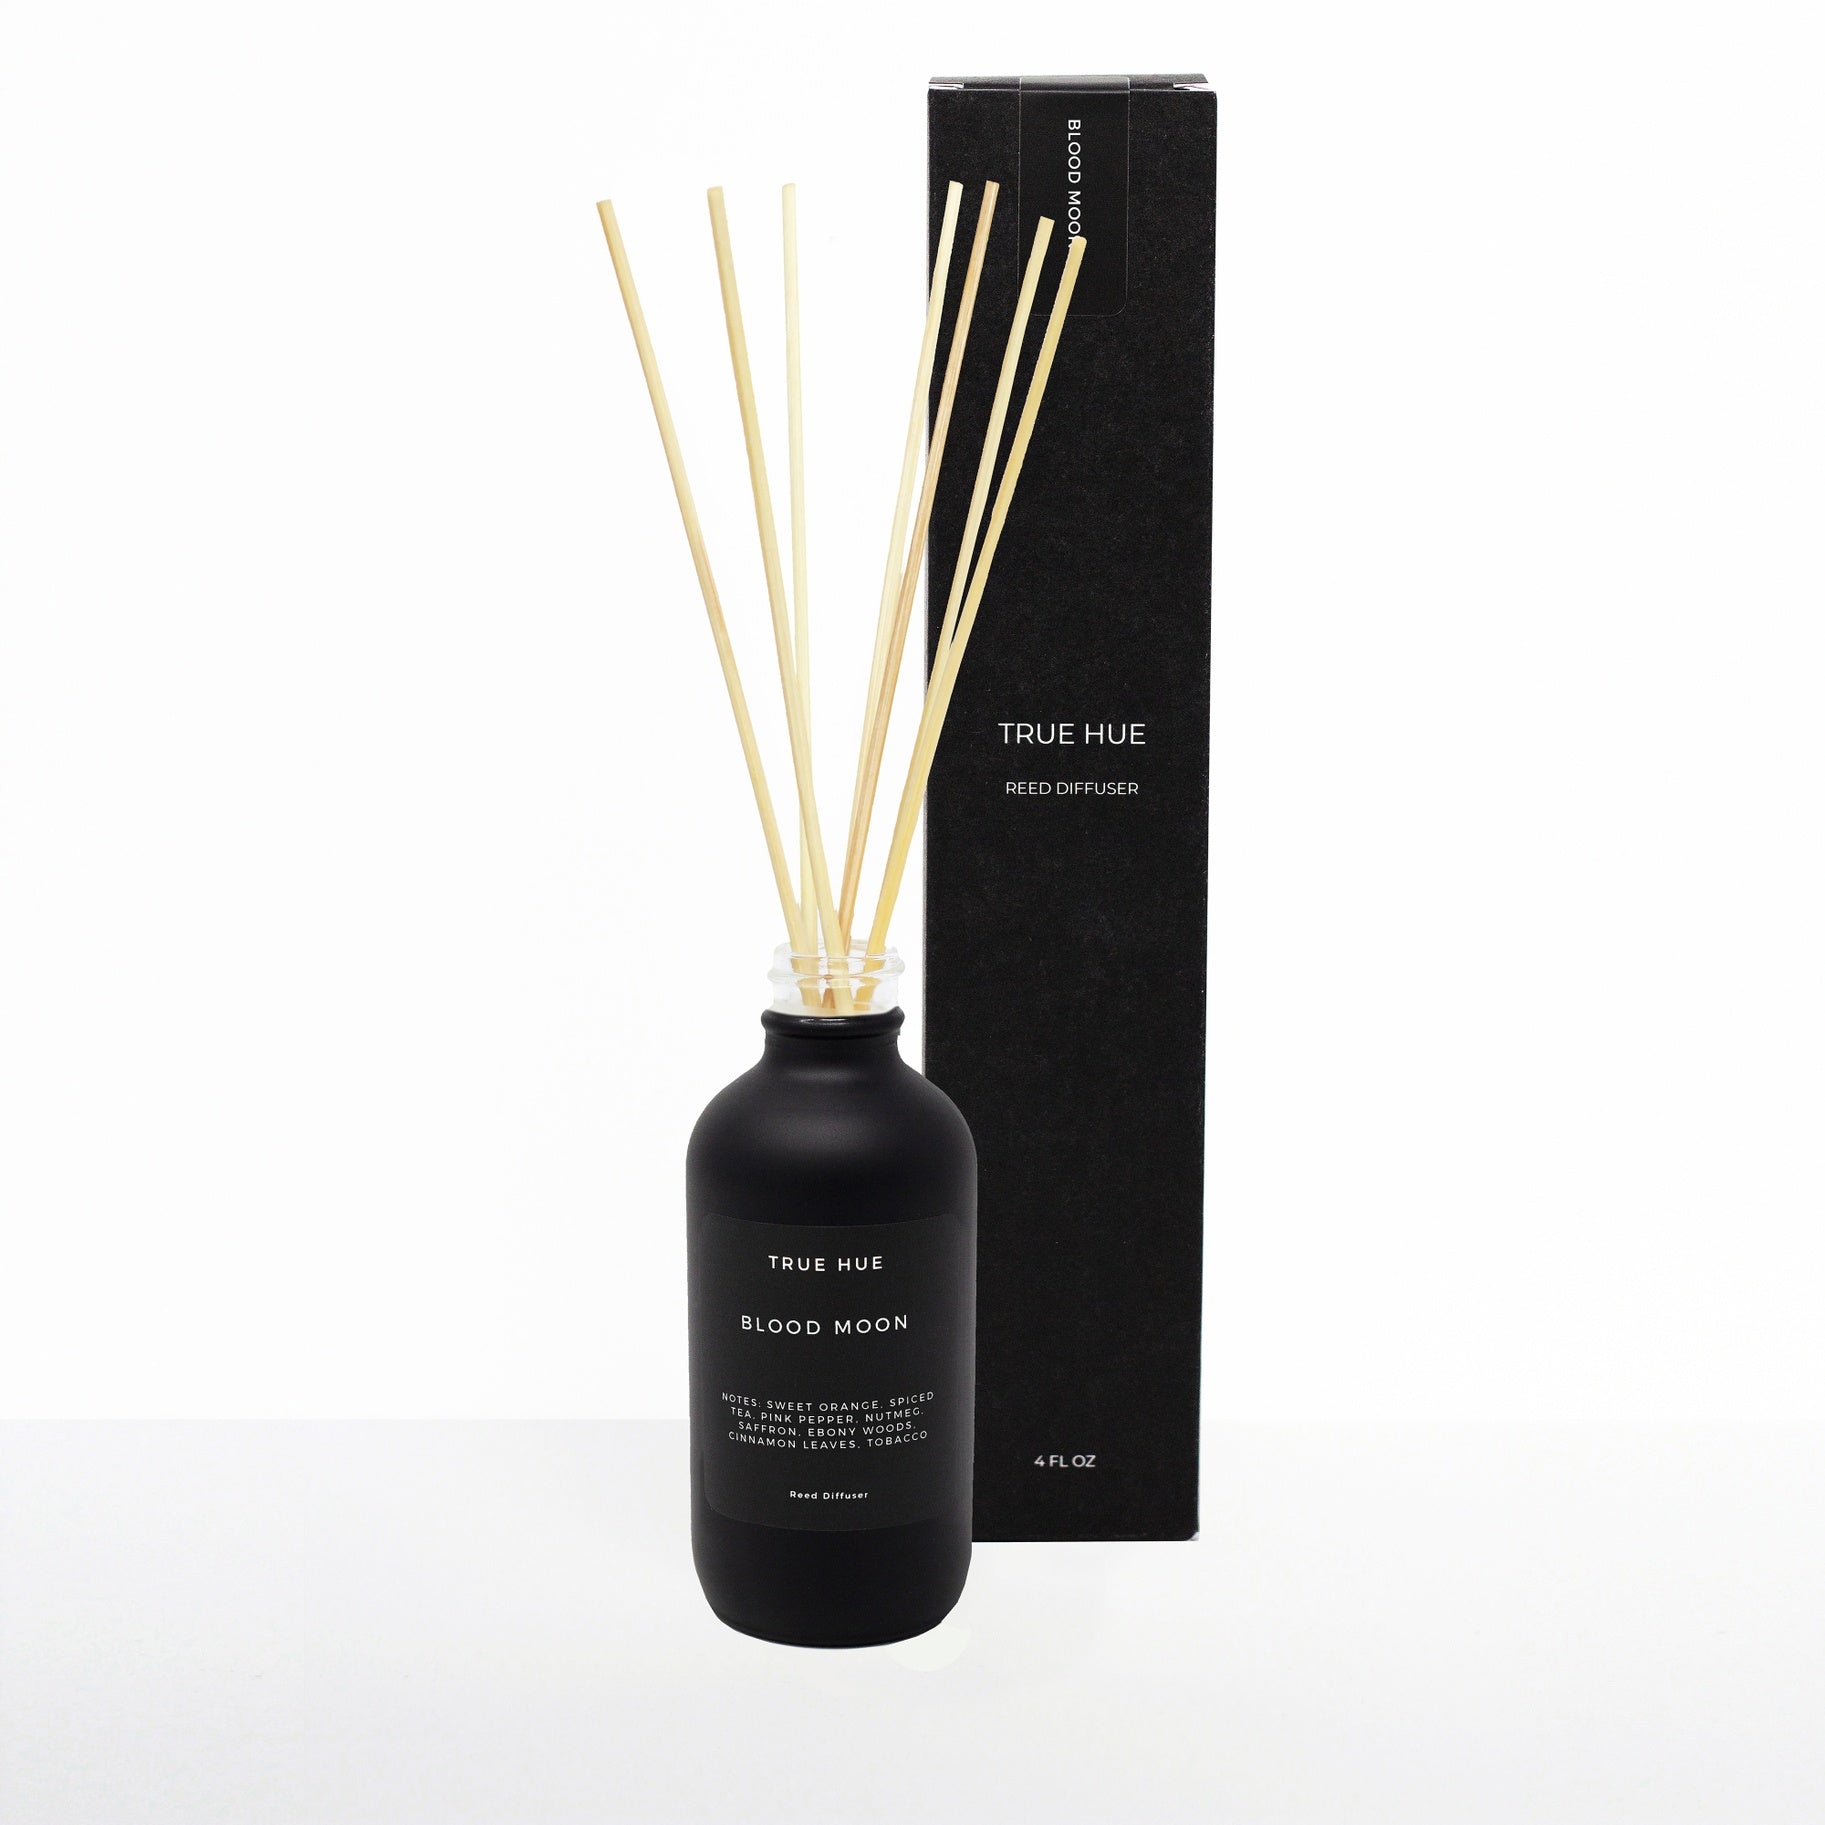 TRUE HUE - REED DIFFUSER 4OZ IN BLOOD MOON